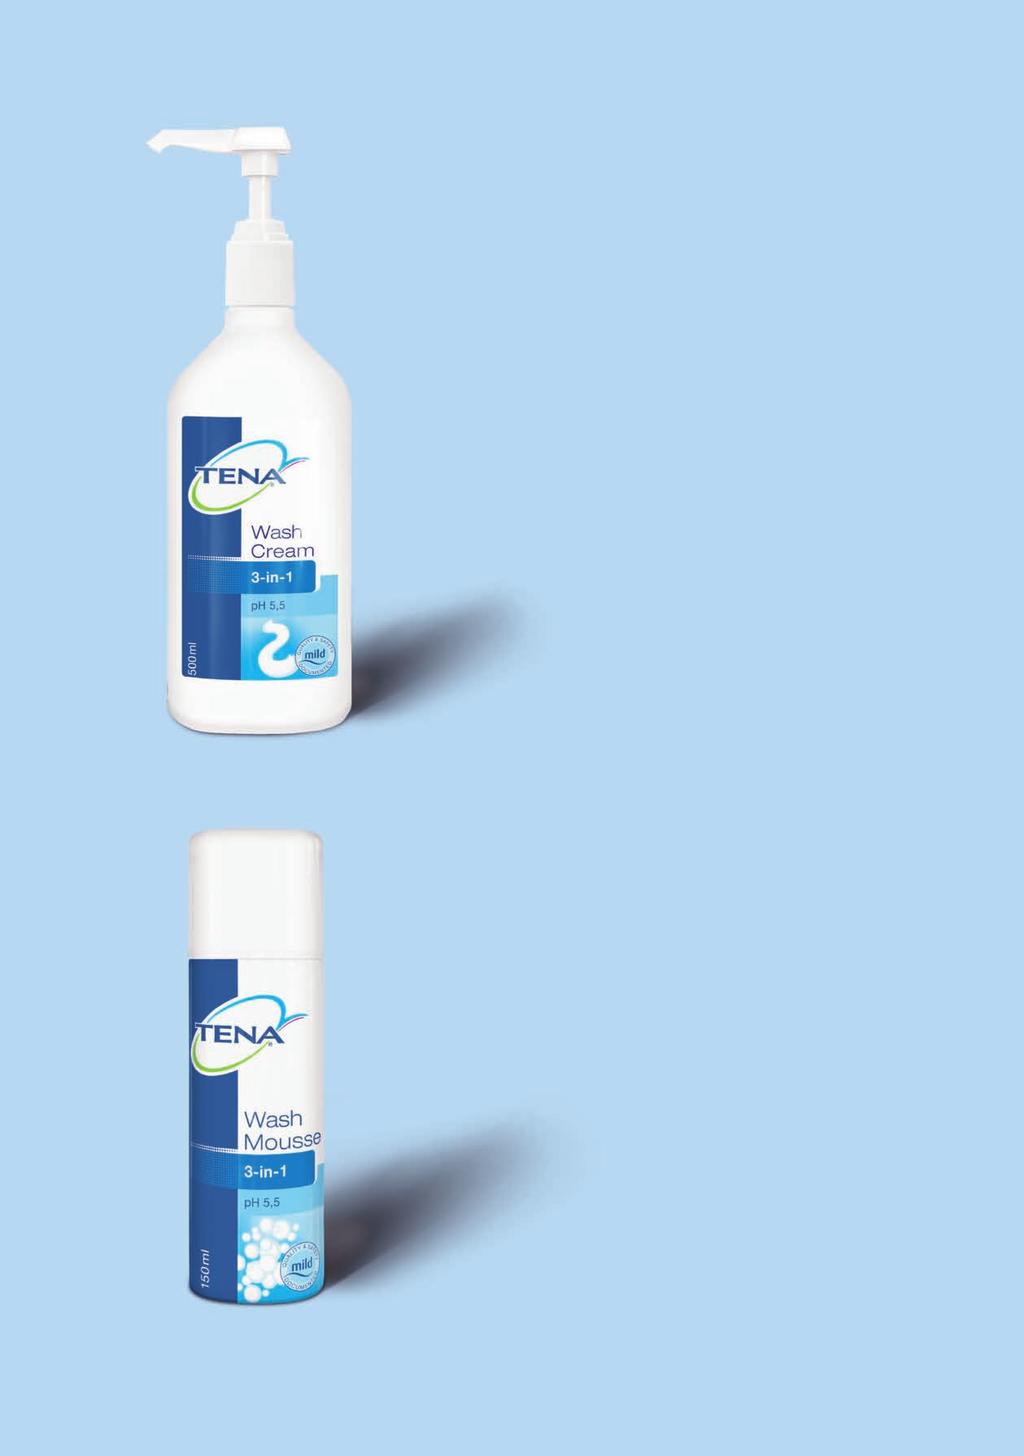 Ageing skin needs a helping hand TENA Wash Cream Looking after our skin and keeping it healthy means much more than just accentuating our natural beauty.